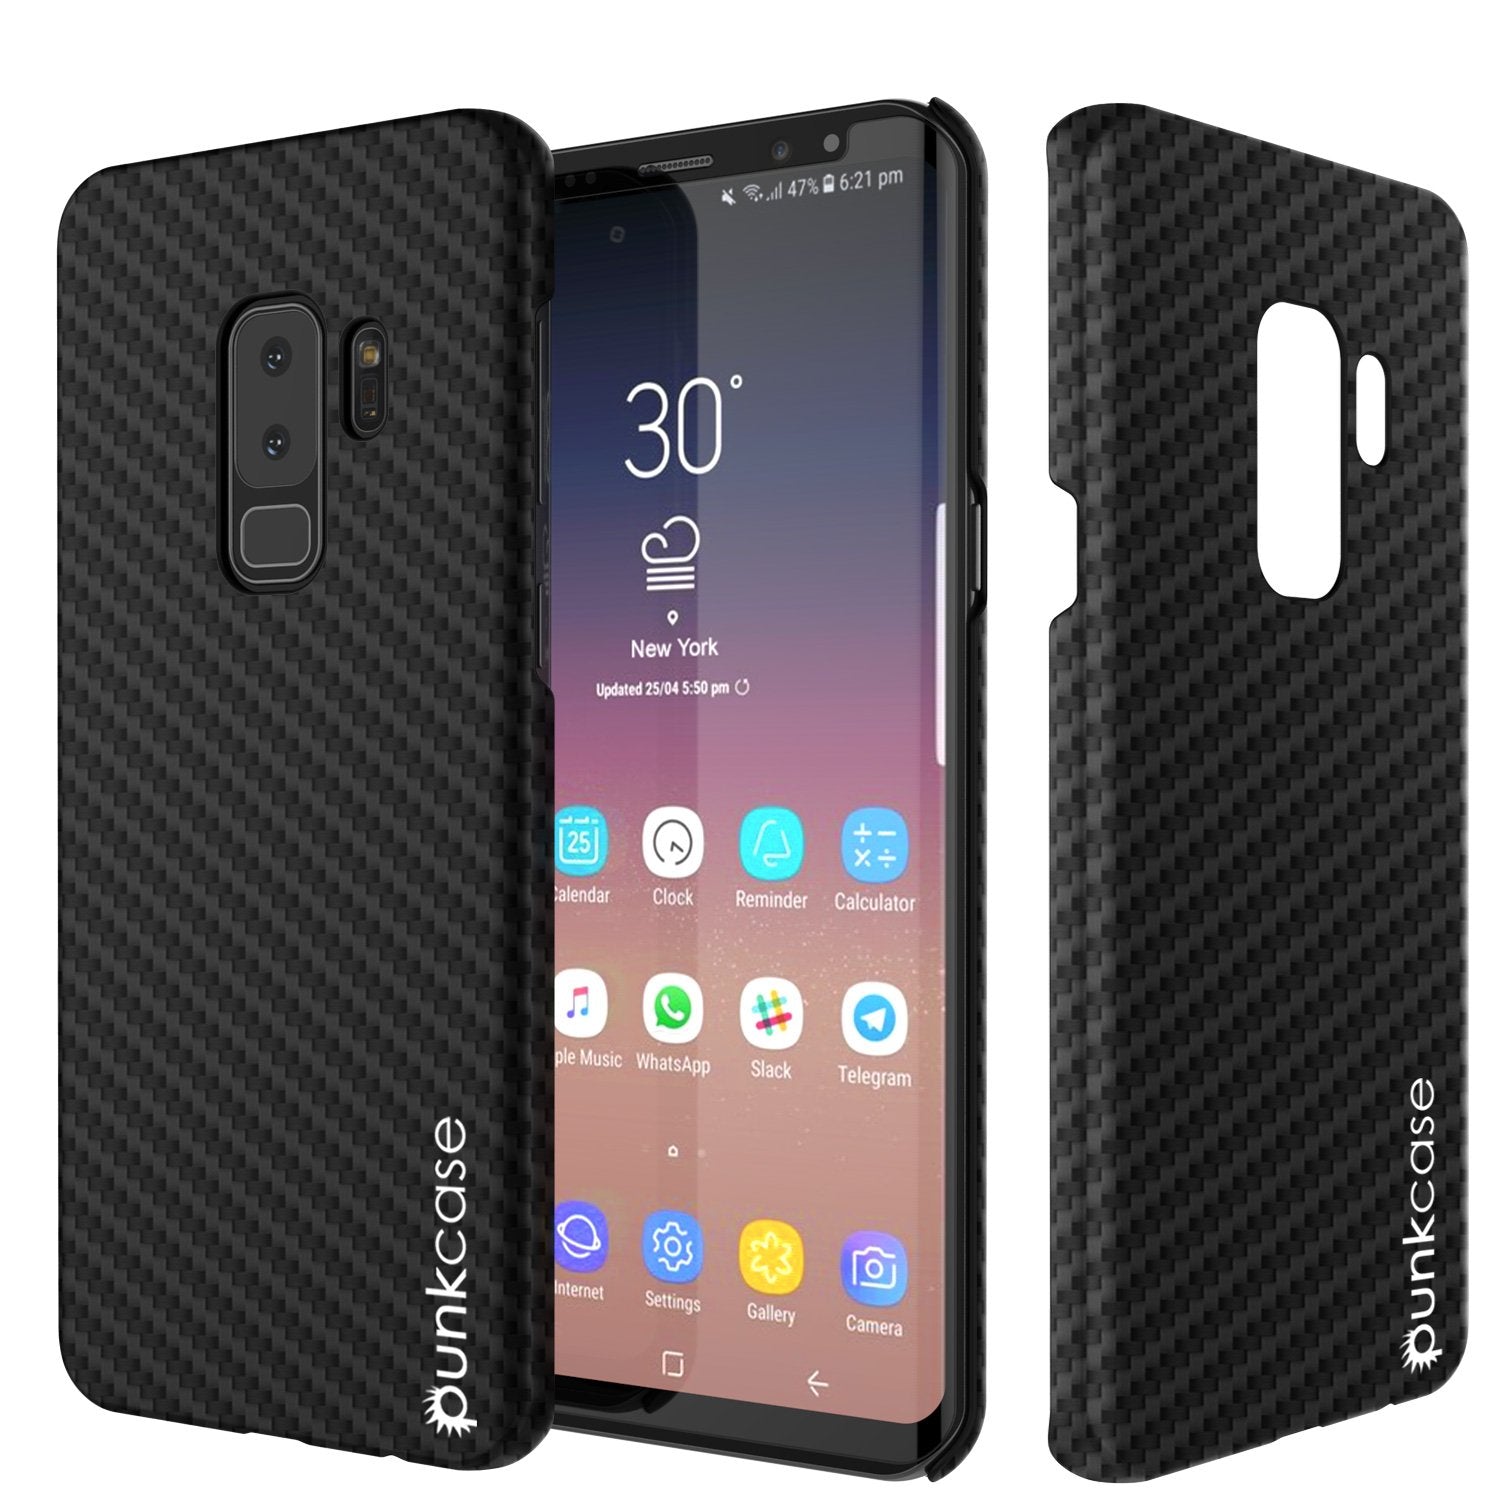 Galaxy S9 Plus Case, Punkcase CarbonShield, Heavy Duty & Ultra Thin 2 Piece Dual Layer PU Leather Cover [shockproof][non slip] with PUNKSHIELD Screen Protector for Samsung S9 Plus [jet black] - PunkCase NZ